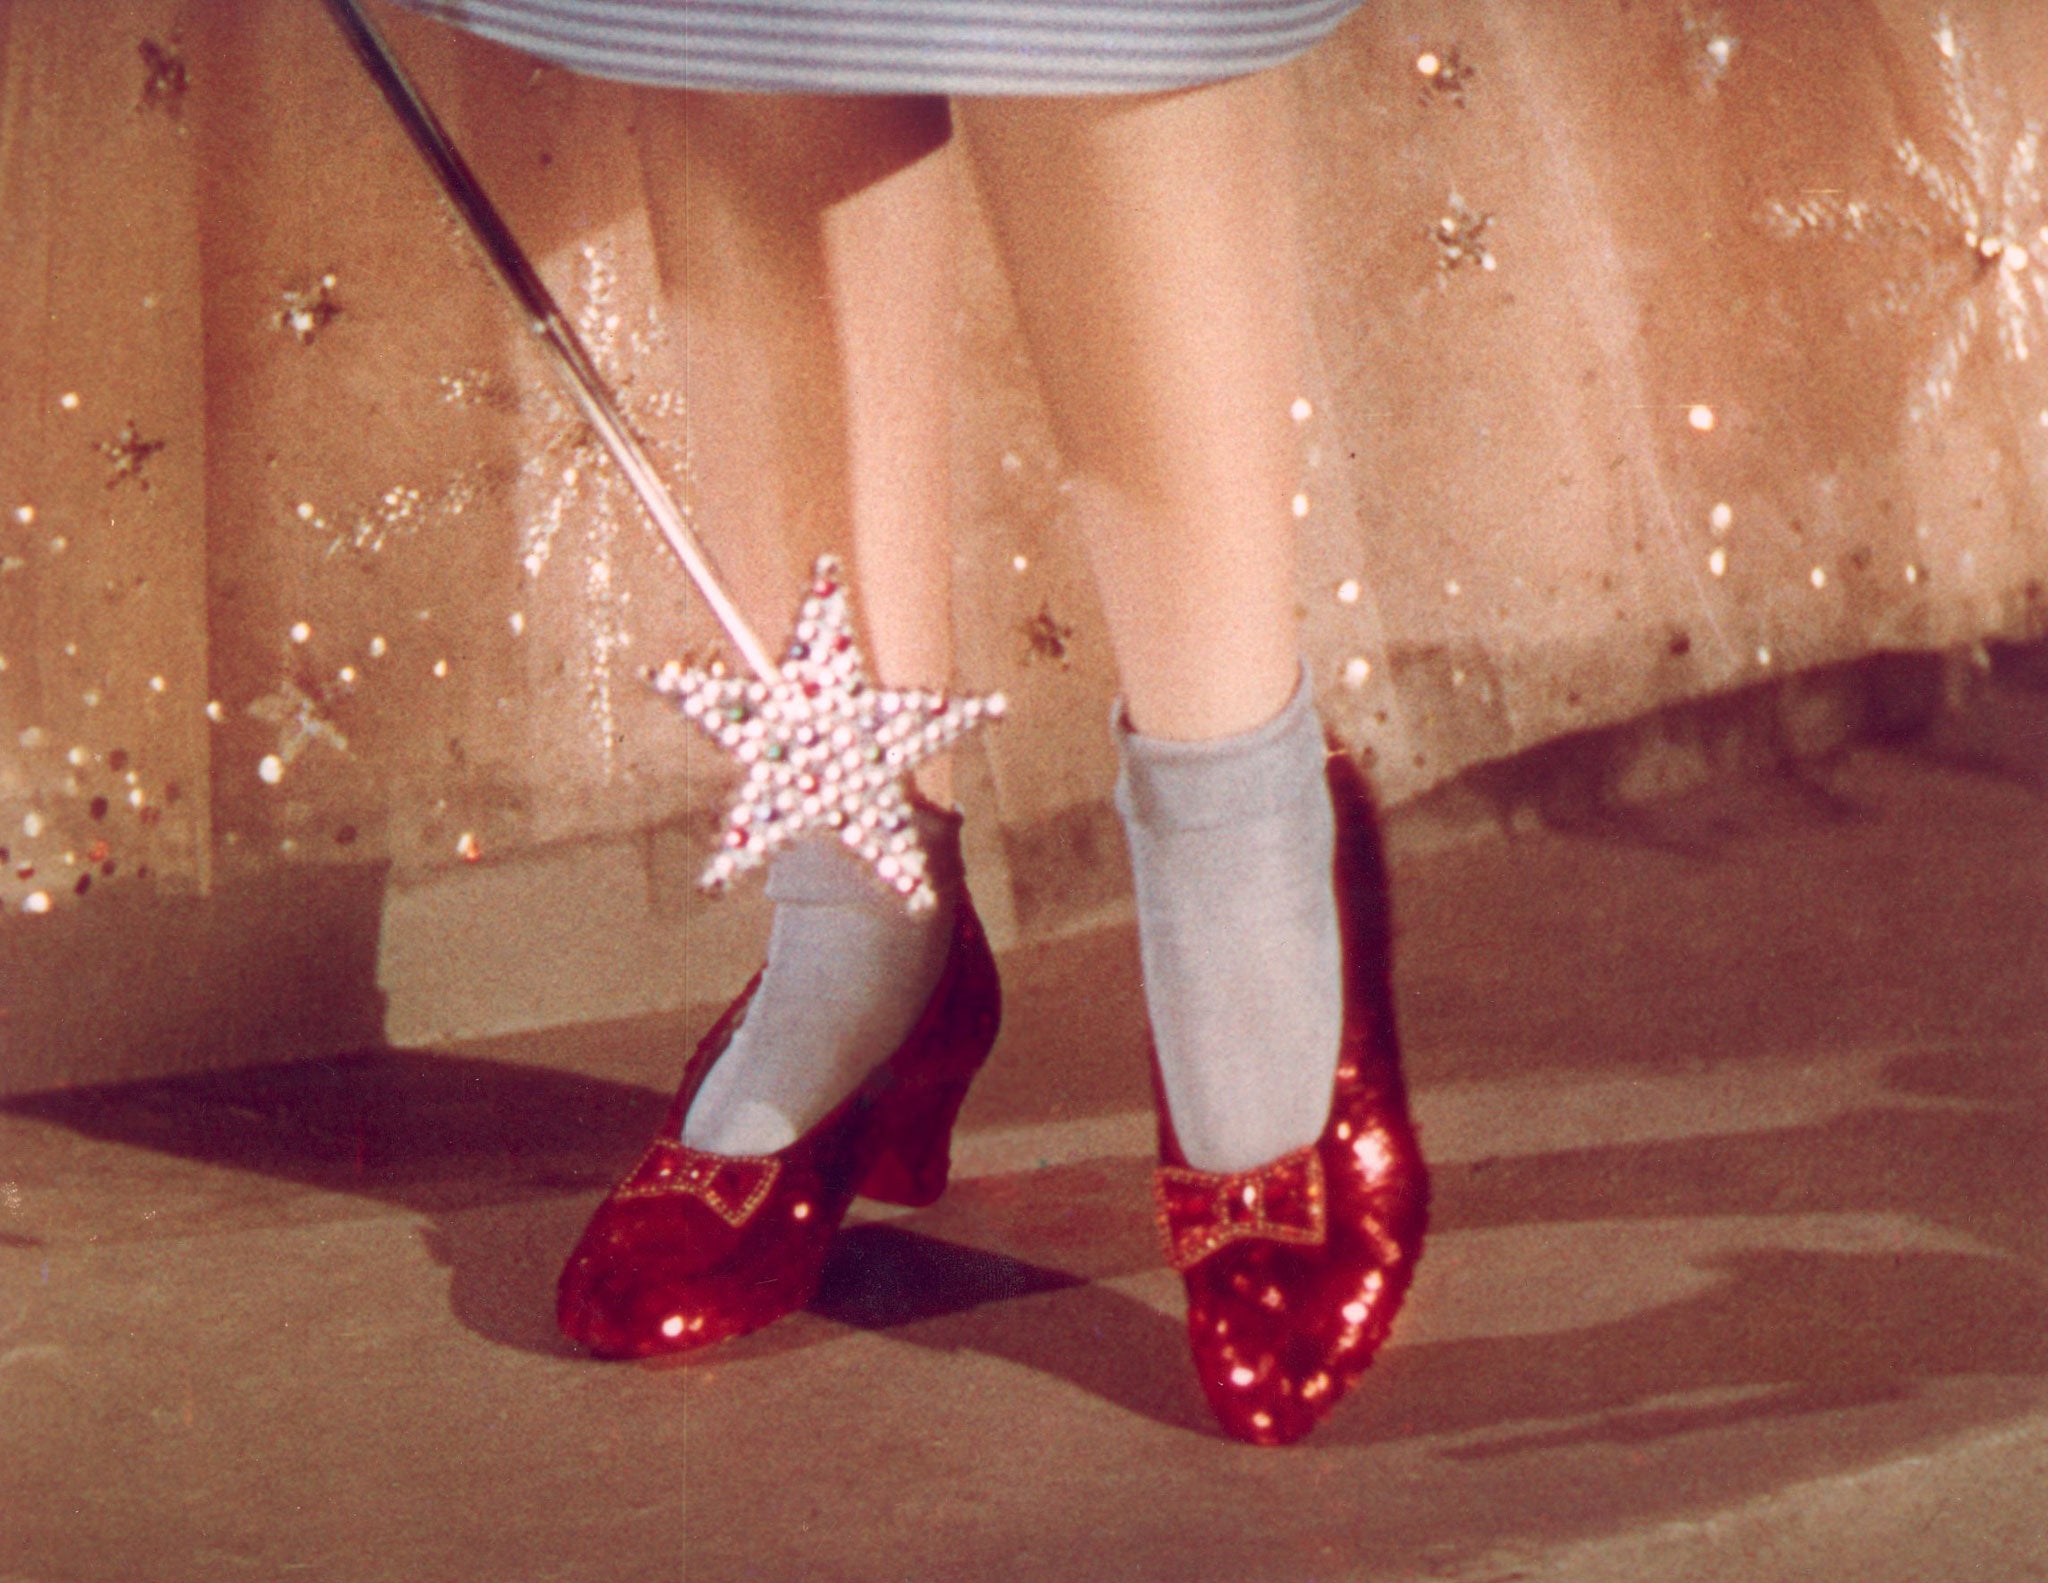 Between six and 10 pairs of slippers were made for Judy Garland and her stunt double but fewer than five are accounted for